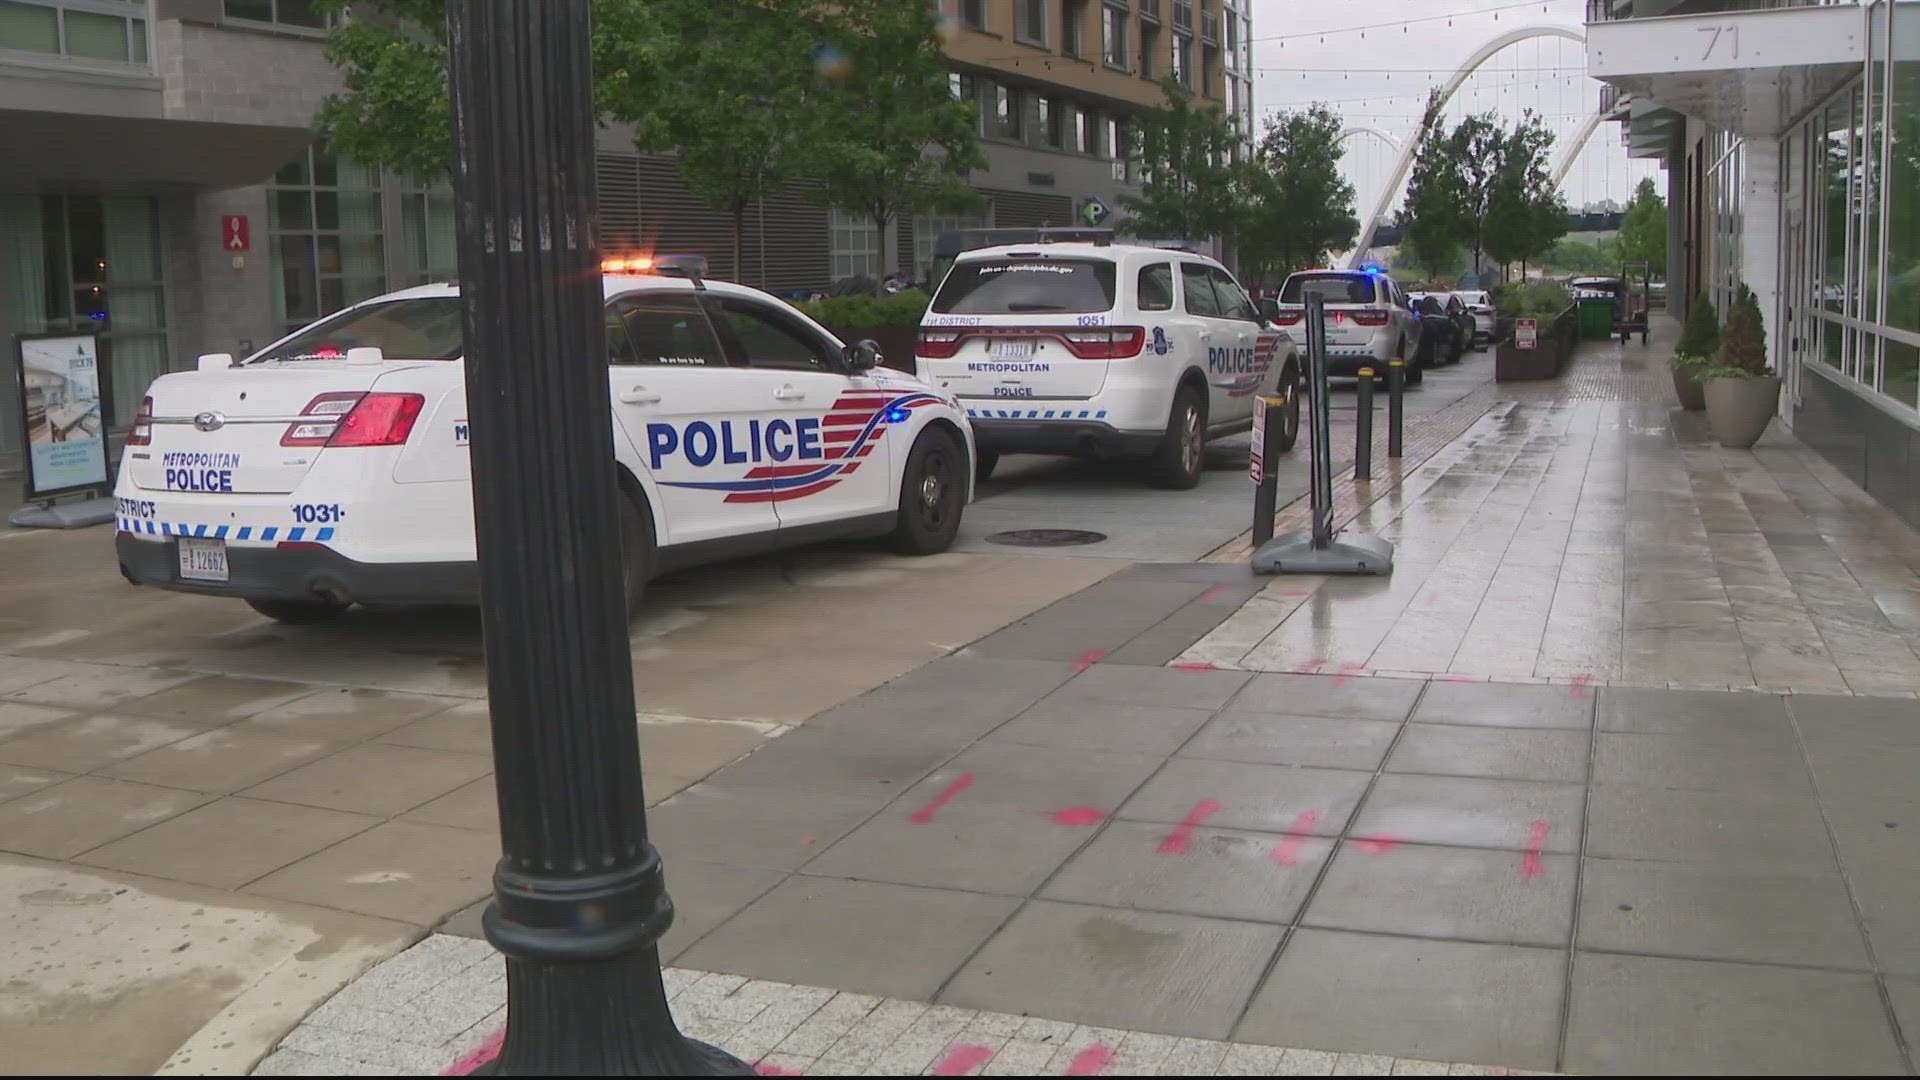 Police say a woman was stabbed to death inside an apartment on Potomac Avenue in Navy Yard. It happened just before 3 this afternoon.